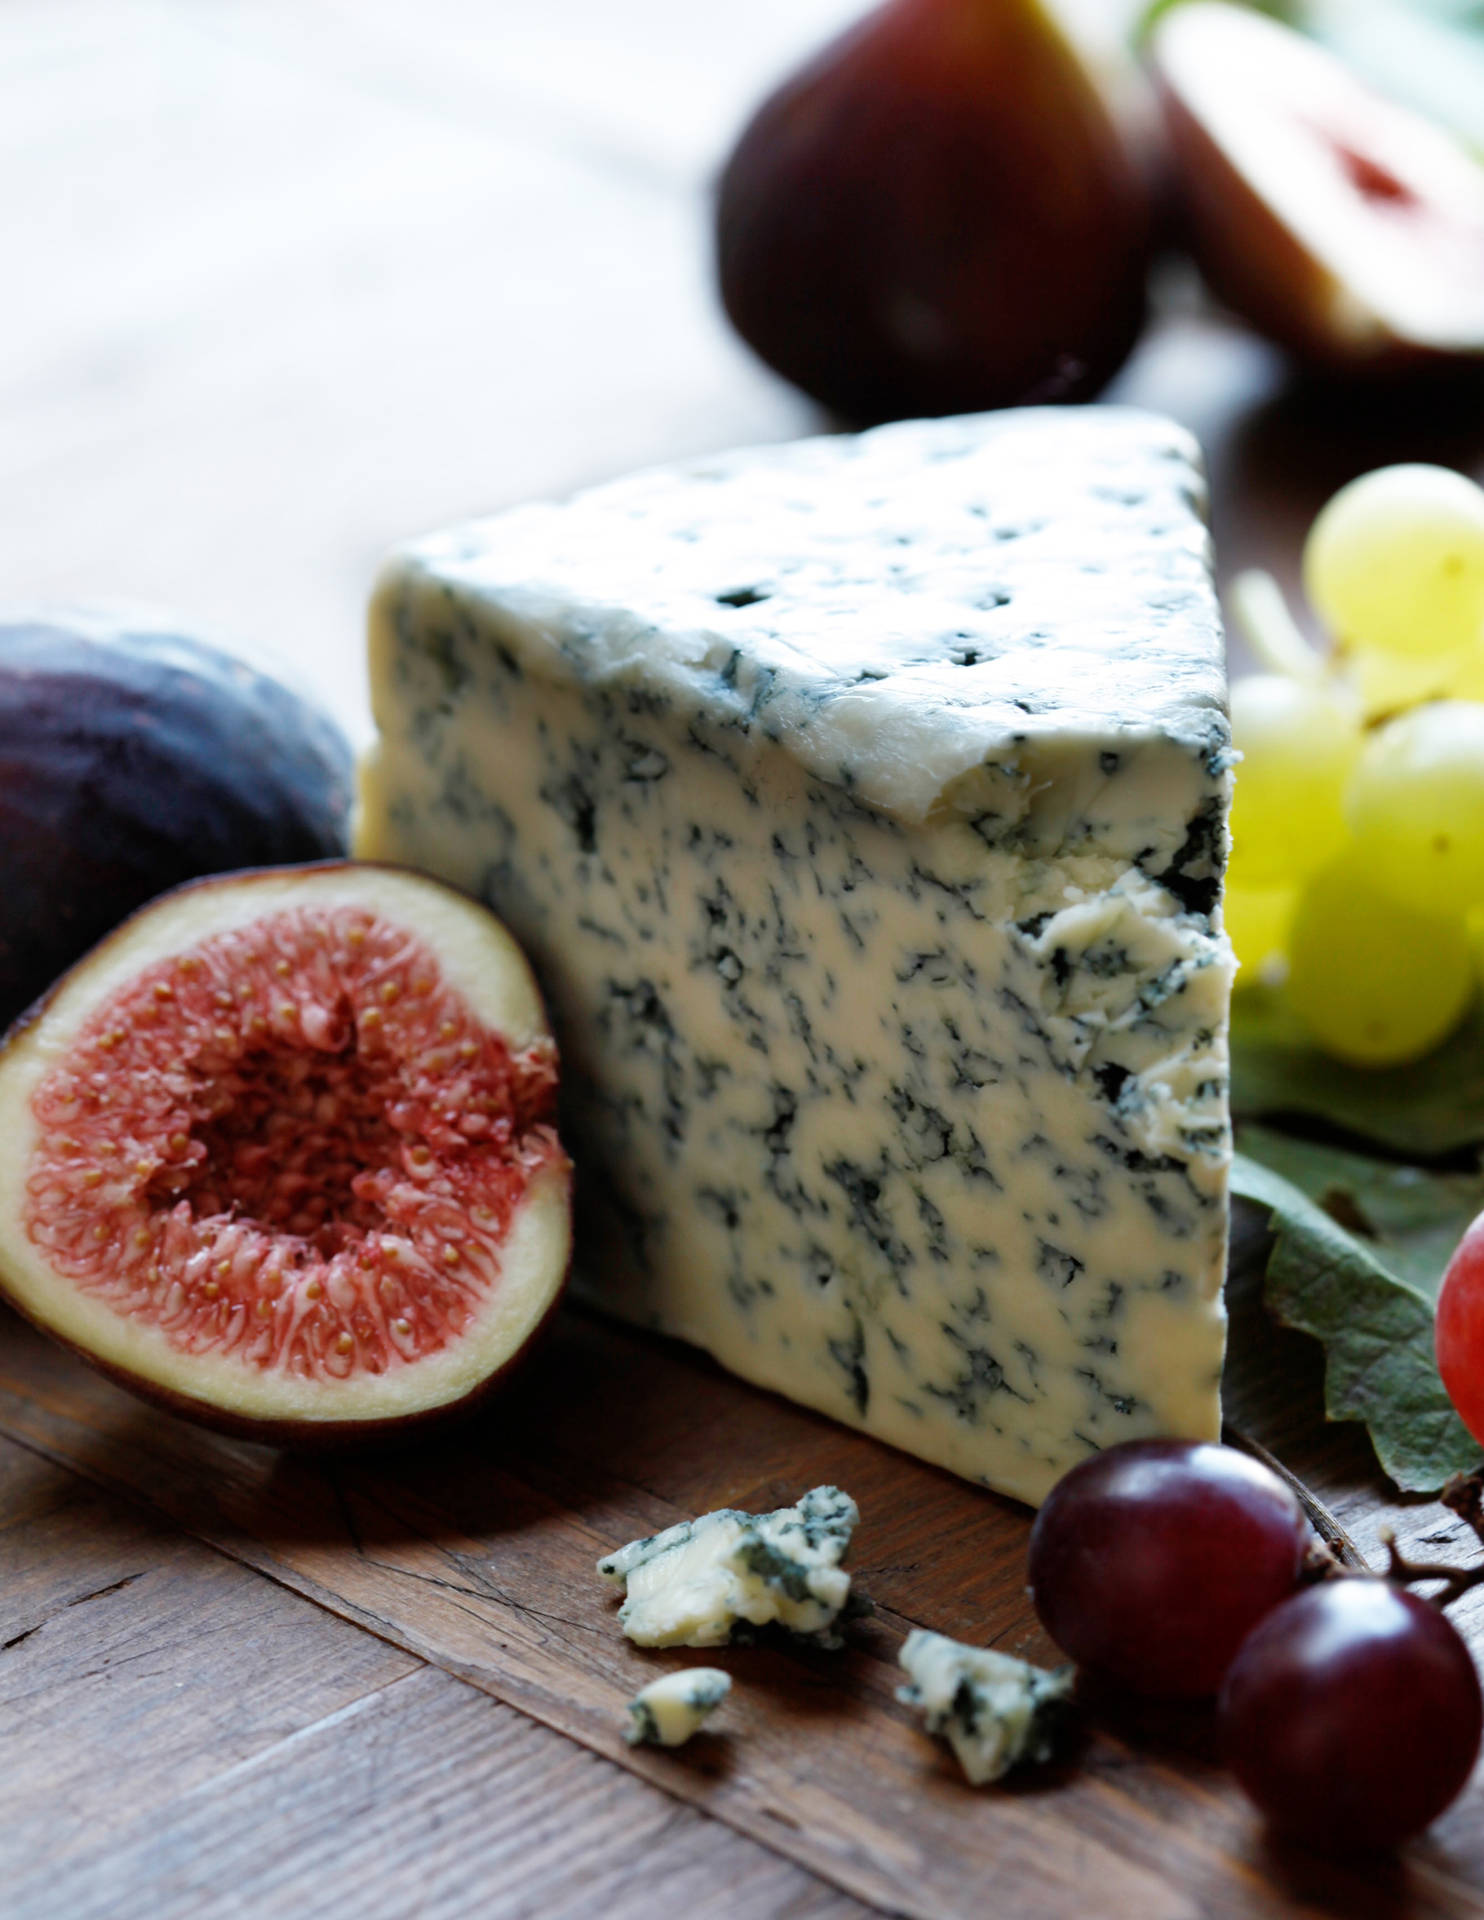 Blue Cheese And Fruits Background